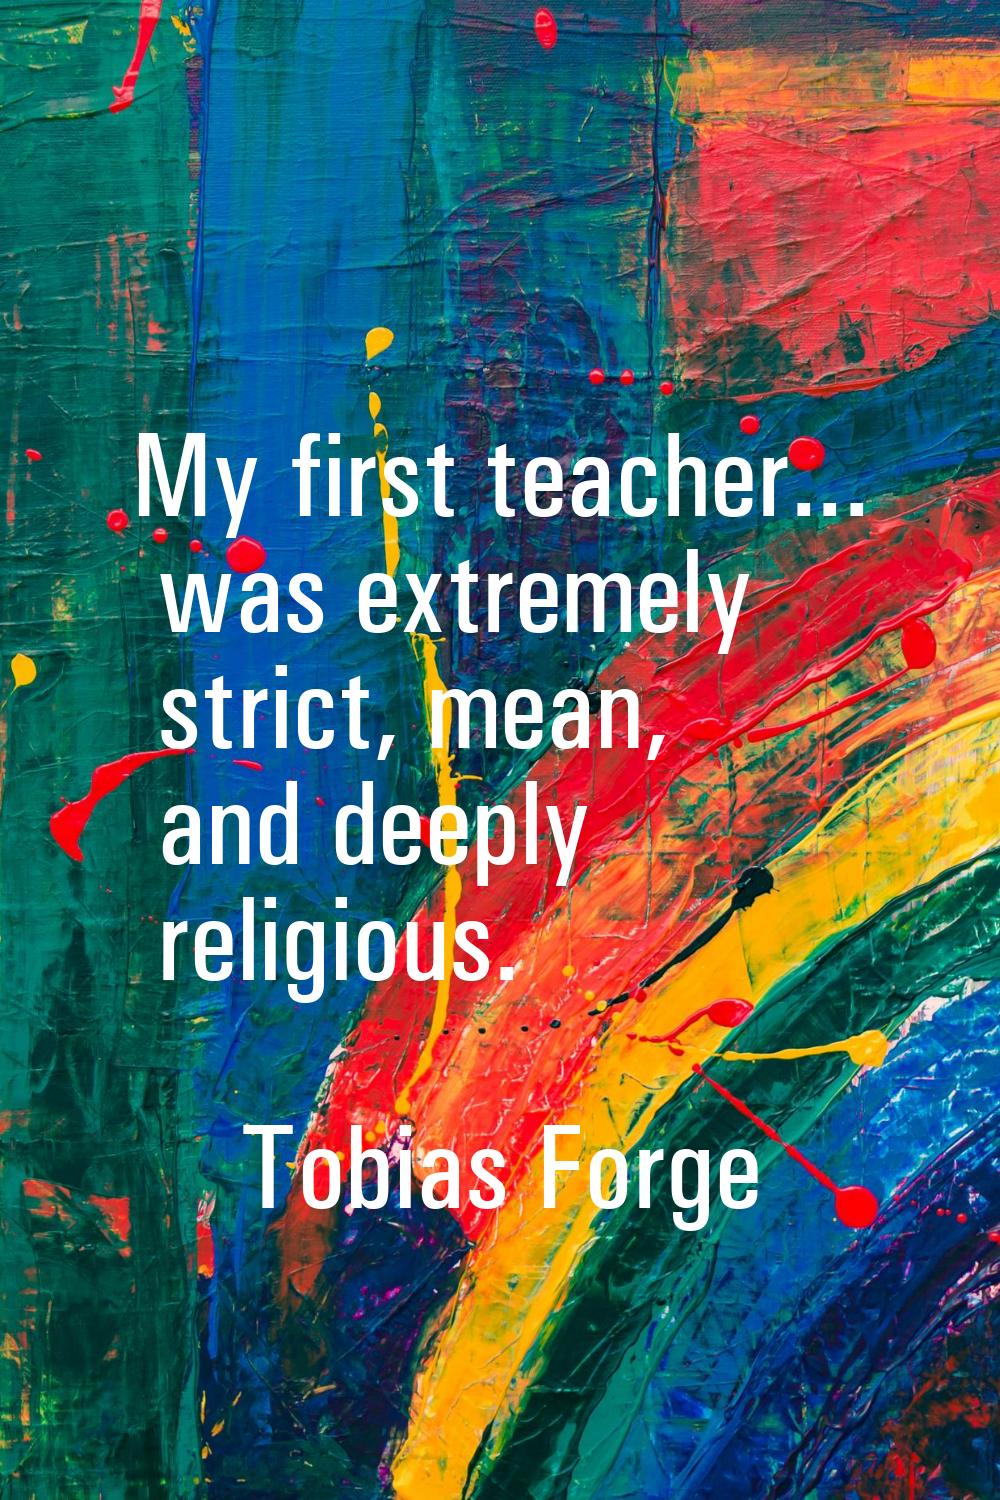 My first teacher... was extremely strict, mean, and deeply religious.